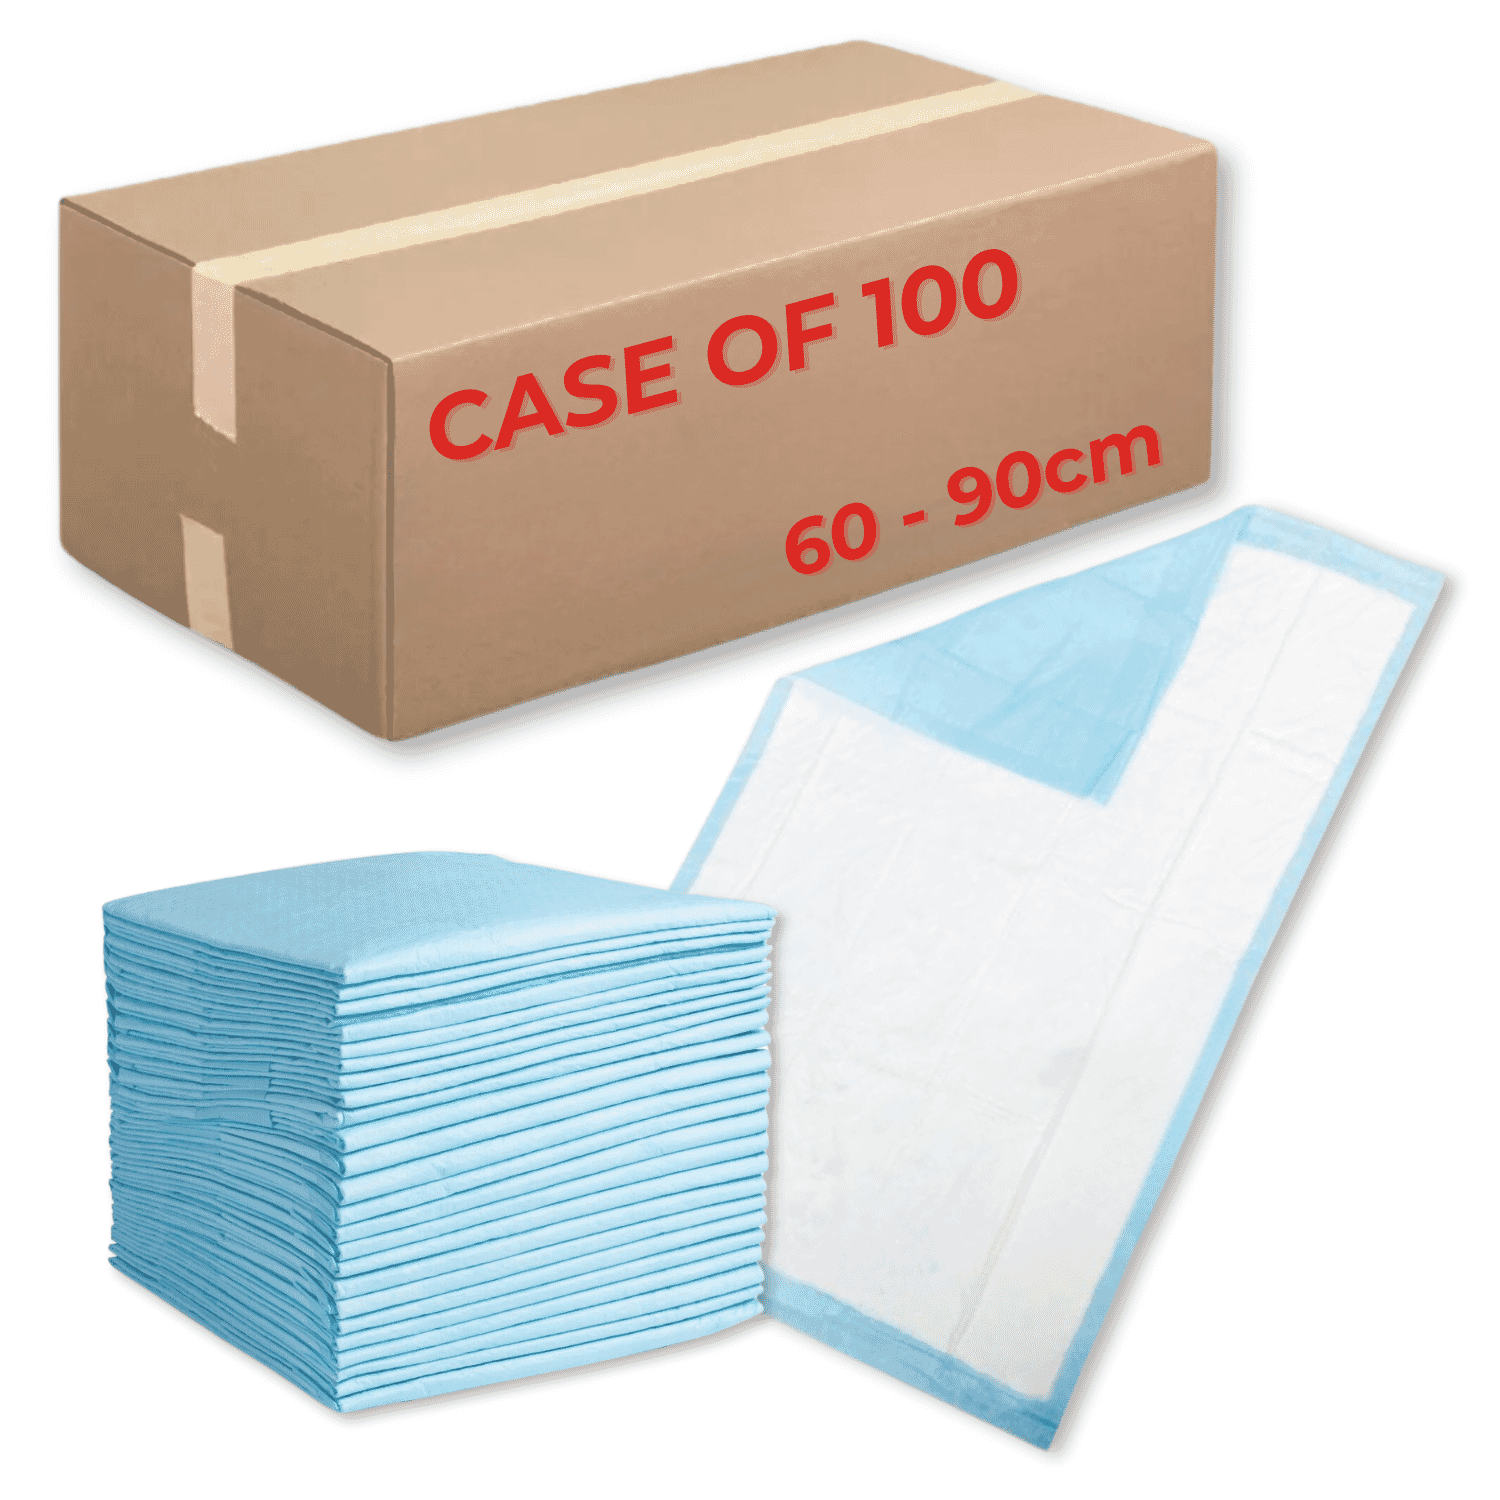 View Disposable Chair Pads 60cms x 60cms Case of 100 information